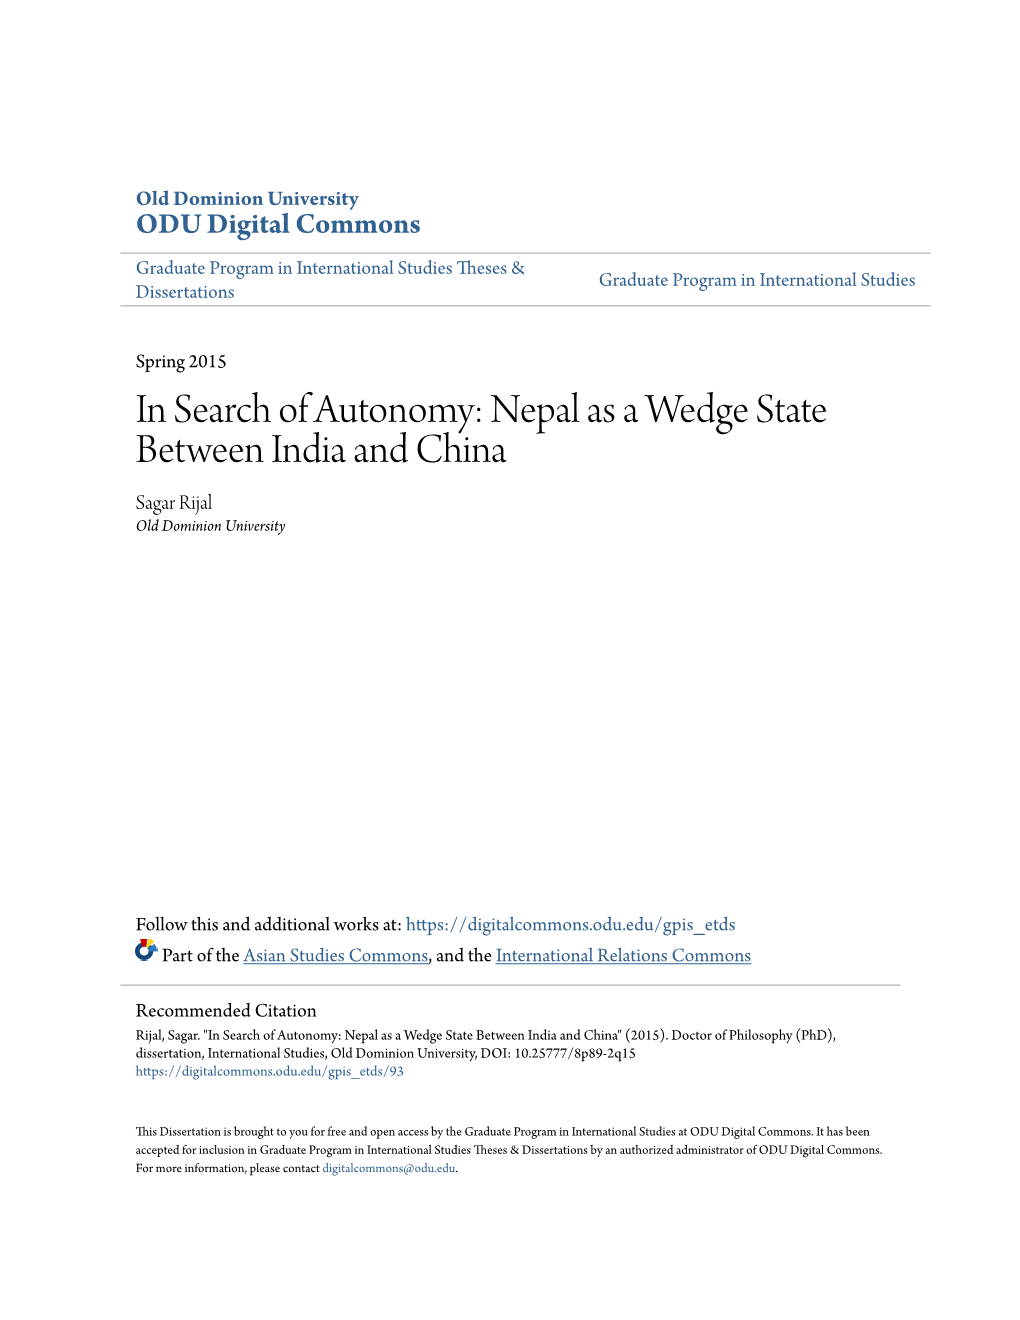 In Search of Autonomy: Nepal As a Wedge State Between India and China Sagar Rijal Old Dominion University